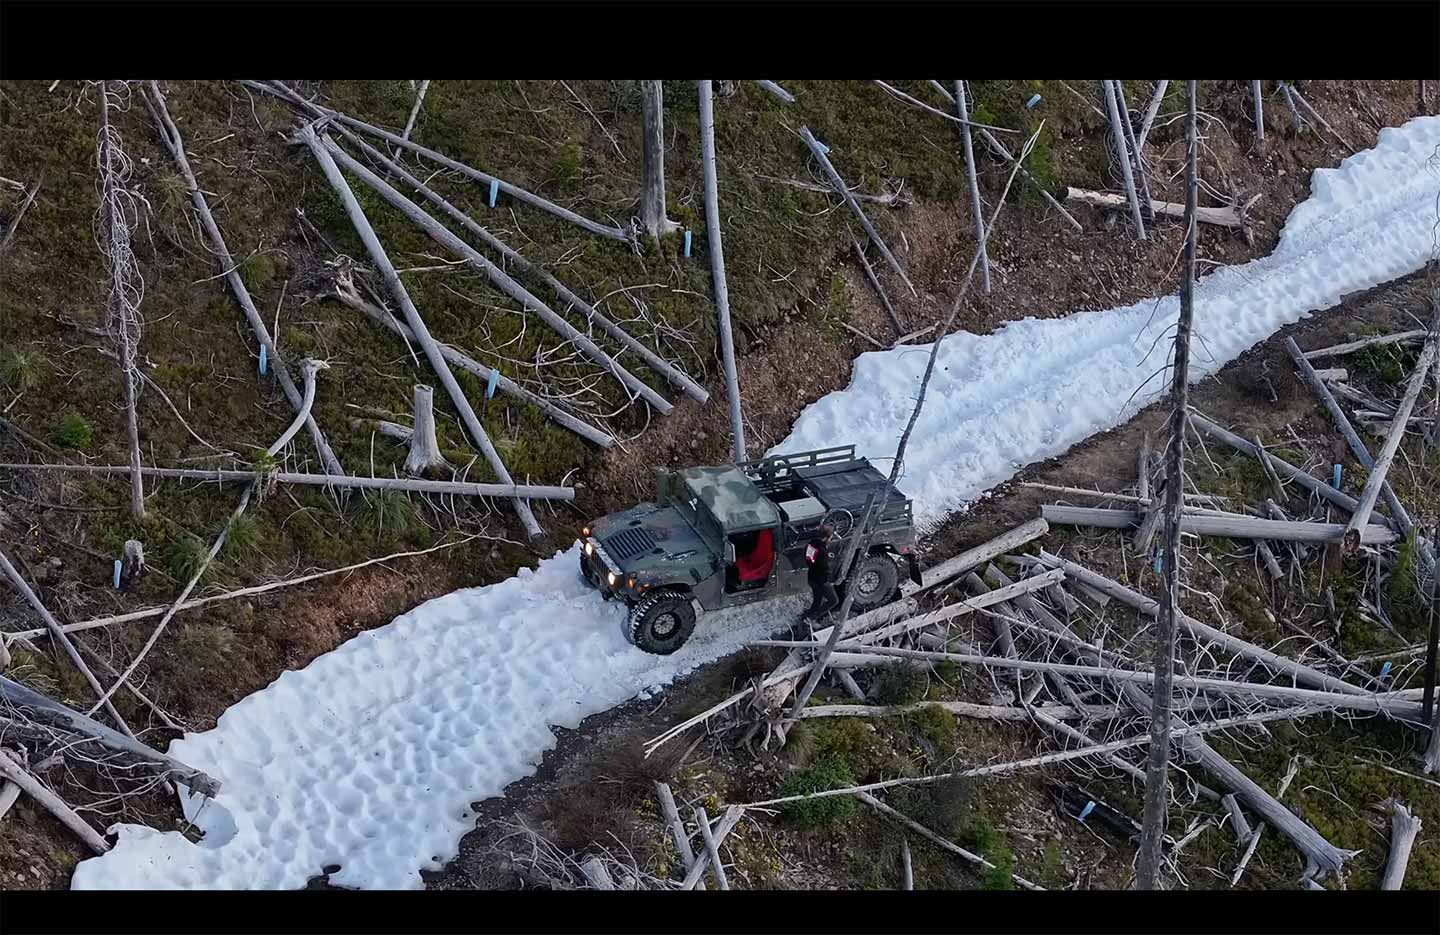 Even in its Very Injured state, the GHPC Humvee was willing to tackle just about any terrain.